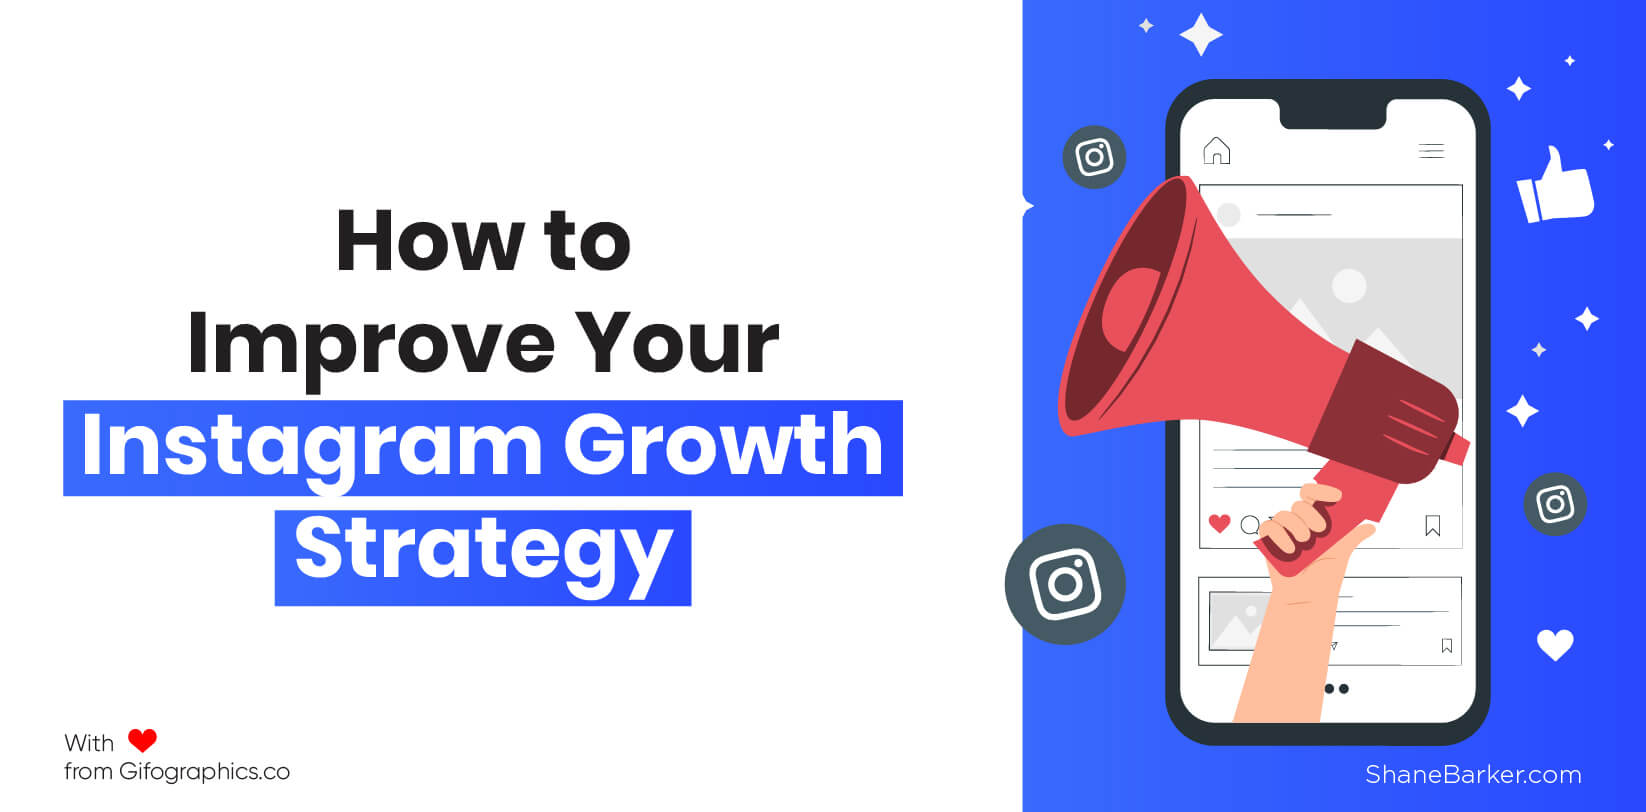 How to Improve Your Instagram Growth Strategy“decoding=